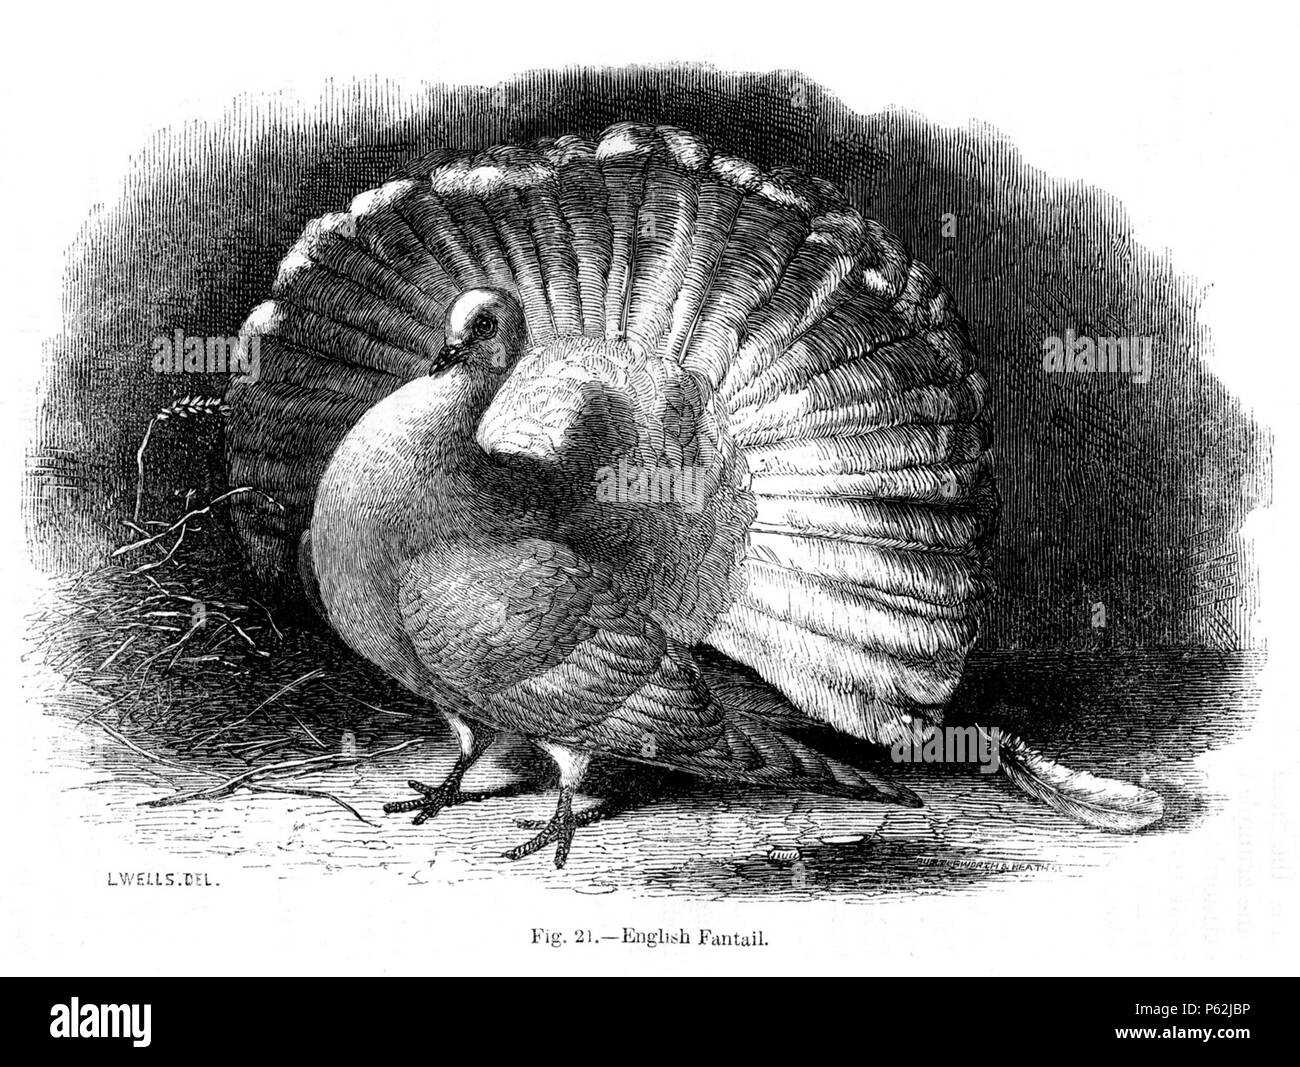 N/A. English: Figure 21 - 'English Fantail Pigeon' from Charles Darwin's book Variation of Animals and Plants Under Domestication published in 1868. January 1868.   Charles Darwin  (1809–1882)       Alternative names Charles Robert Darwin  Description British naturalist and author  Date of birth/death 12 February 1809 19 April 1882  Location of birth/death The Mount, Shrewsbury Down House  Authority control  : Q1035 VIAF:27063124 ISNI:0000 0001 2125 1077 ULAN:500228559 LCCN:n78095637 NARA:10580367 WorldCat 413 Darwin Variation Fig21 Stock Photo